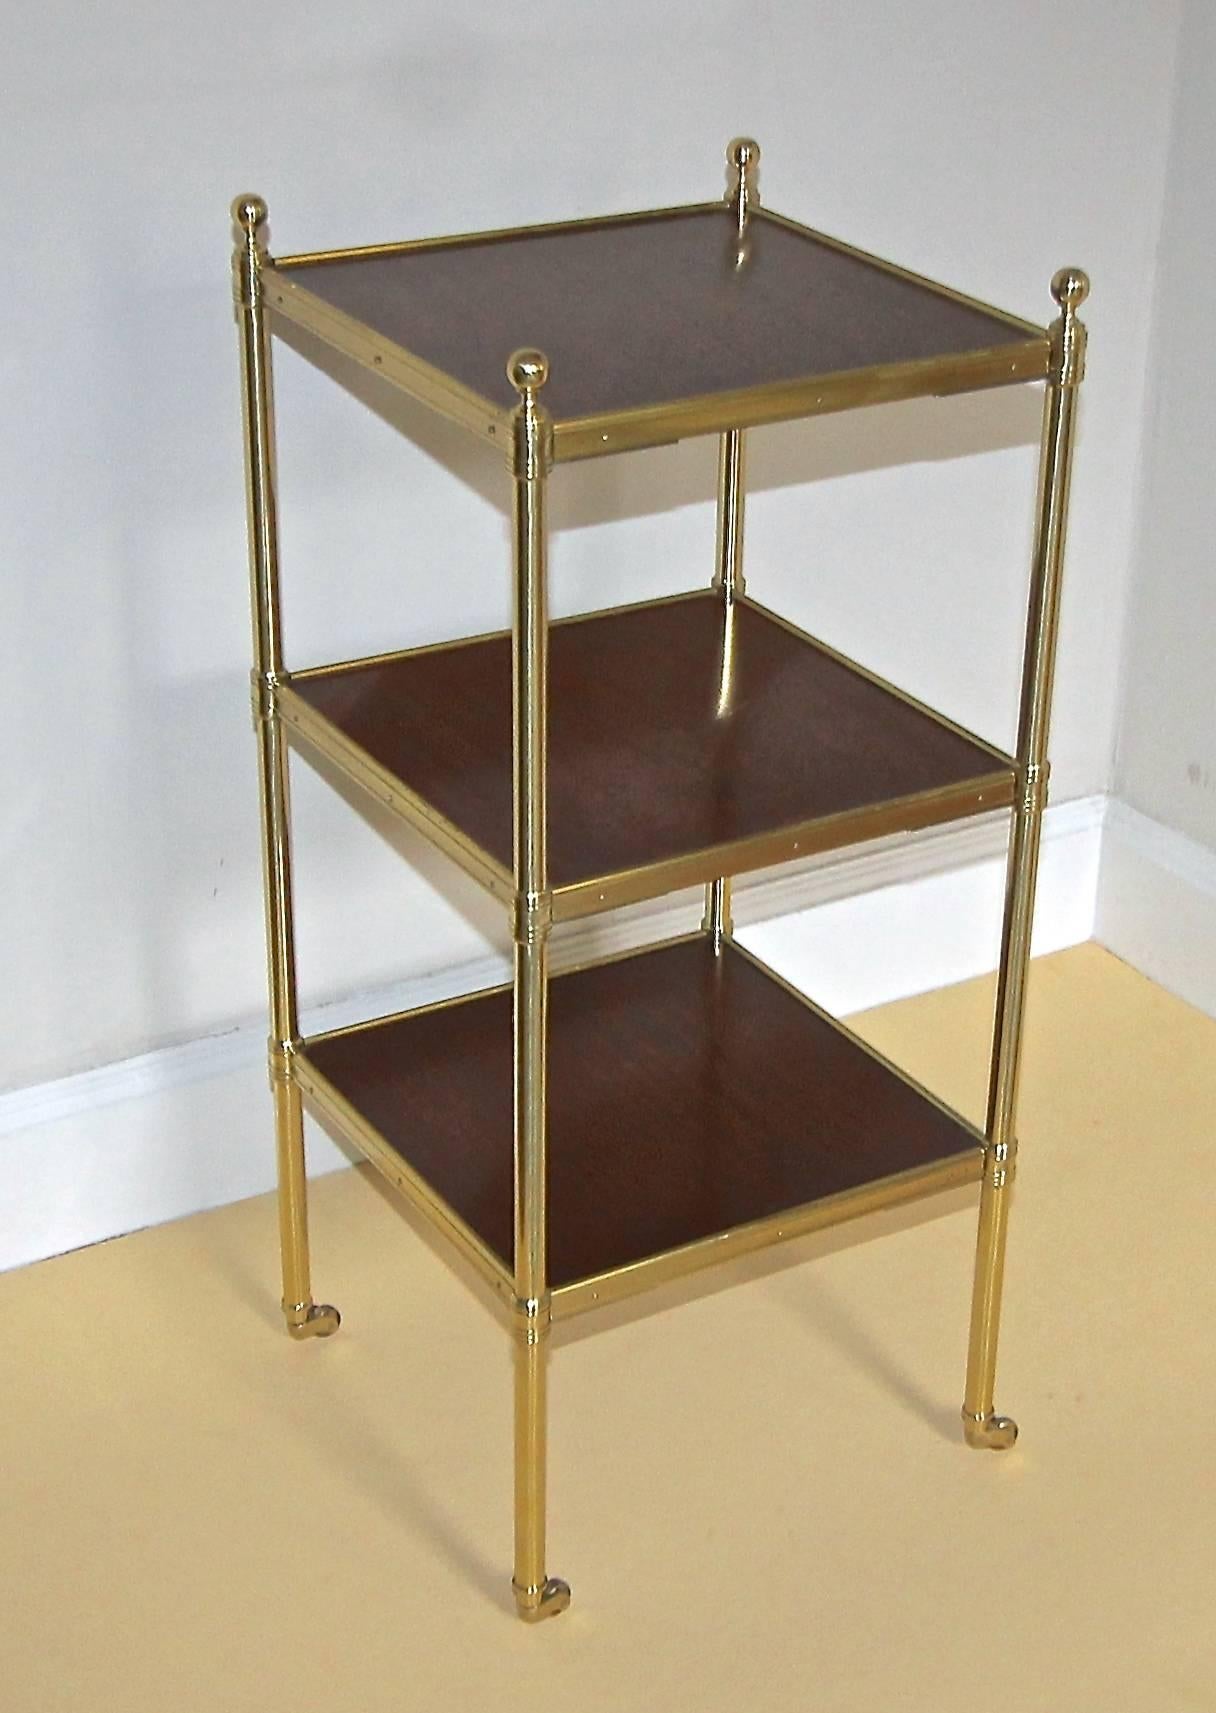 Regency style three-tier side étagère table with mahogany wood tops, brass fittings and brass caster wheels.